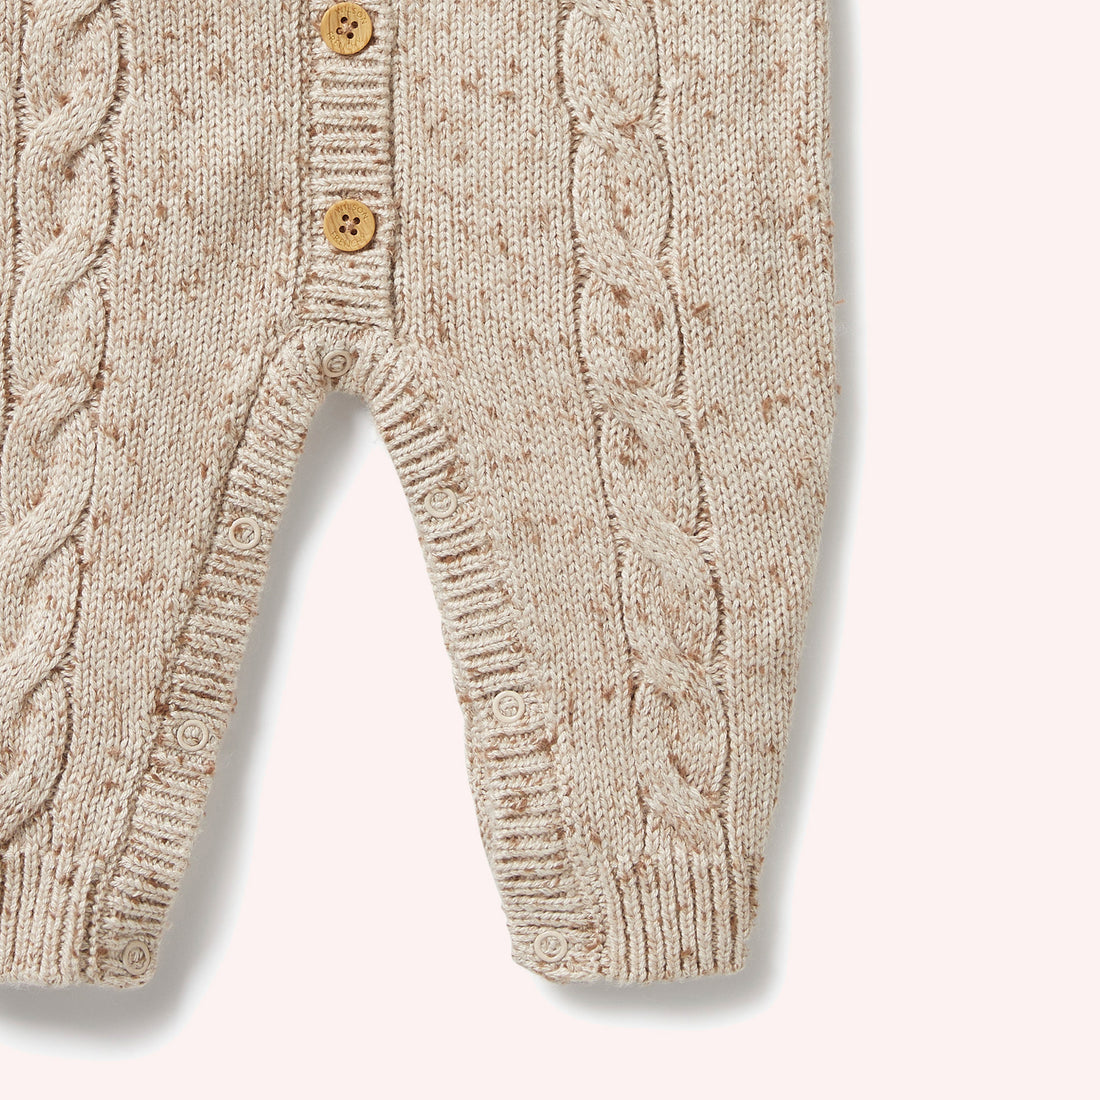 Knitted Cable Growsuit - Almond Fleck